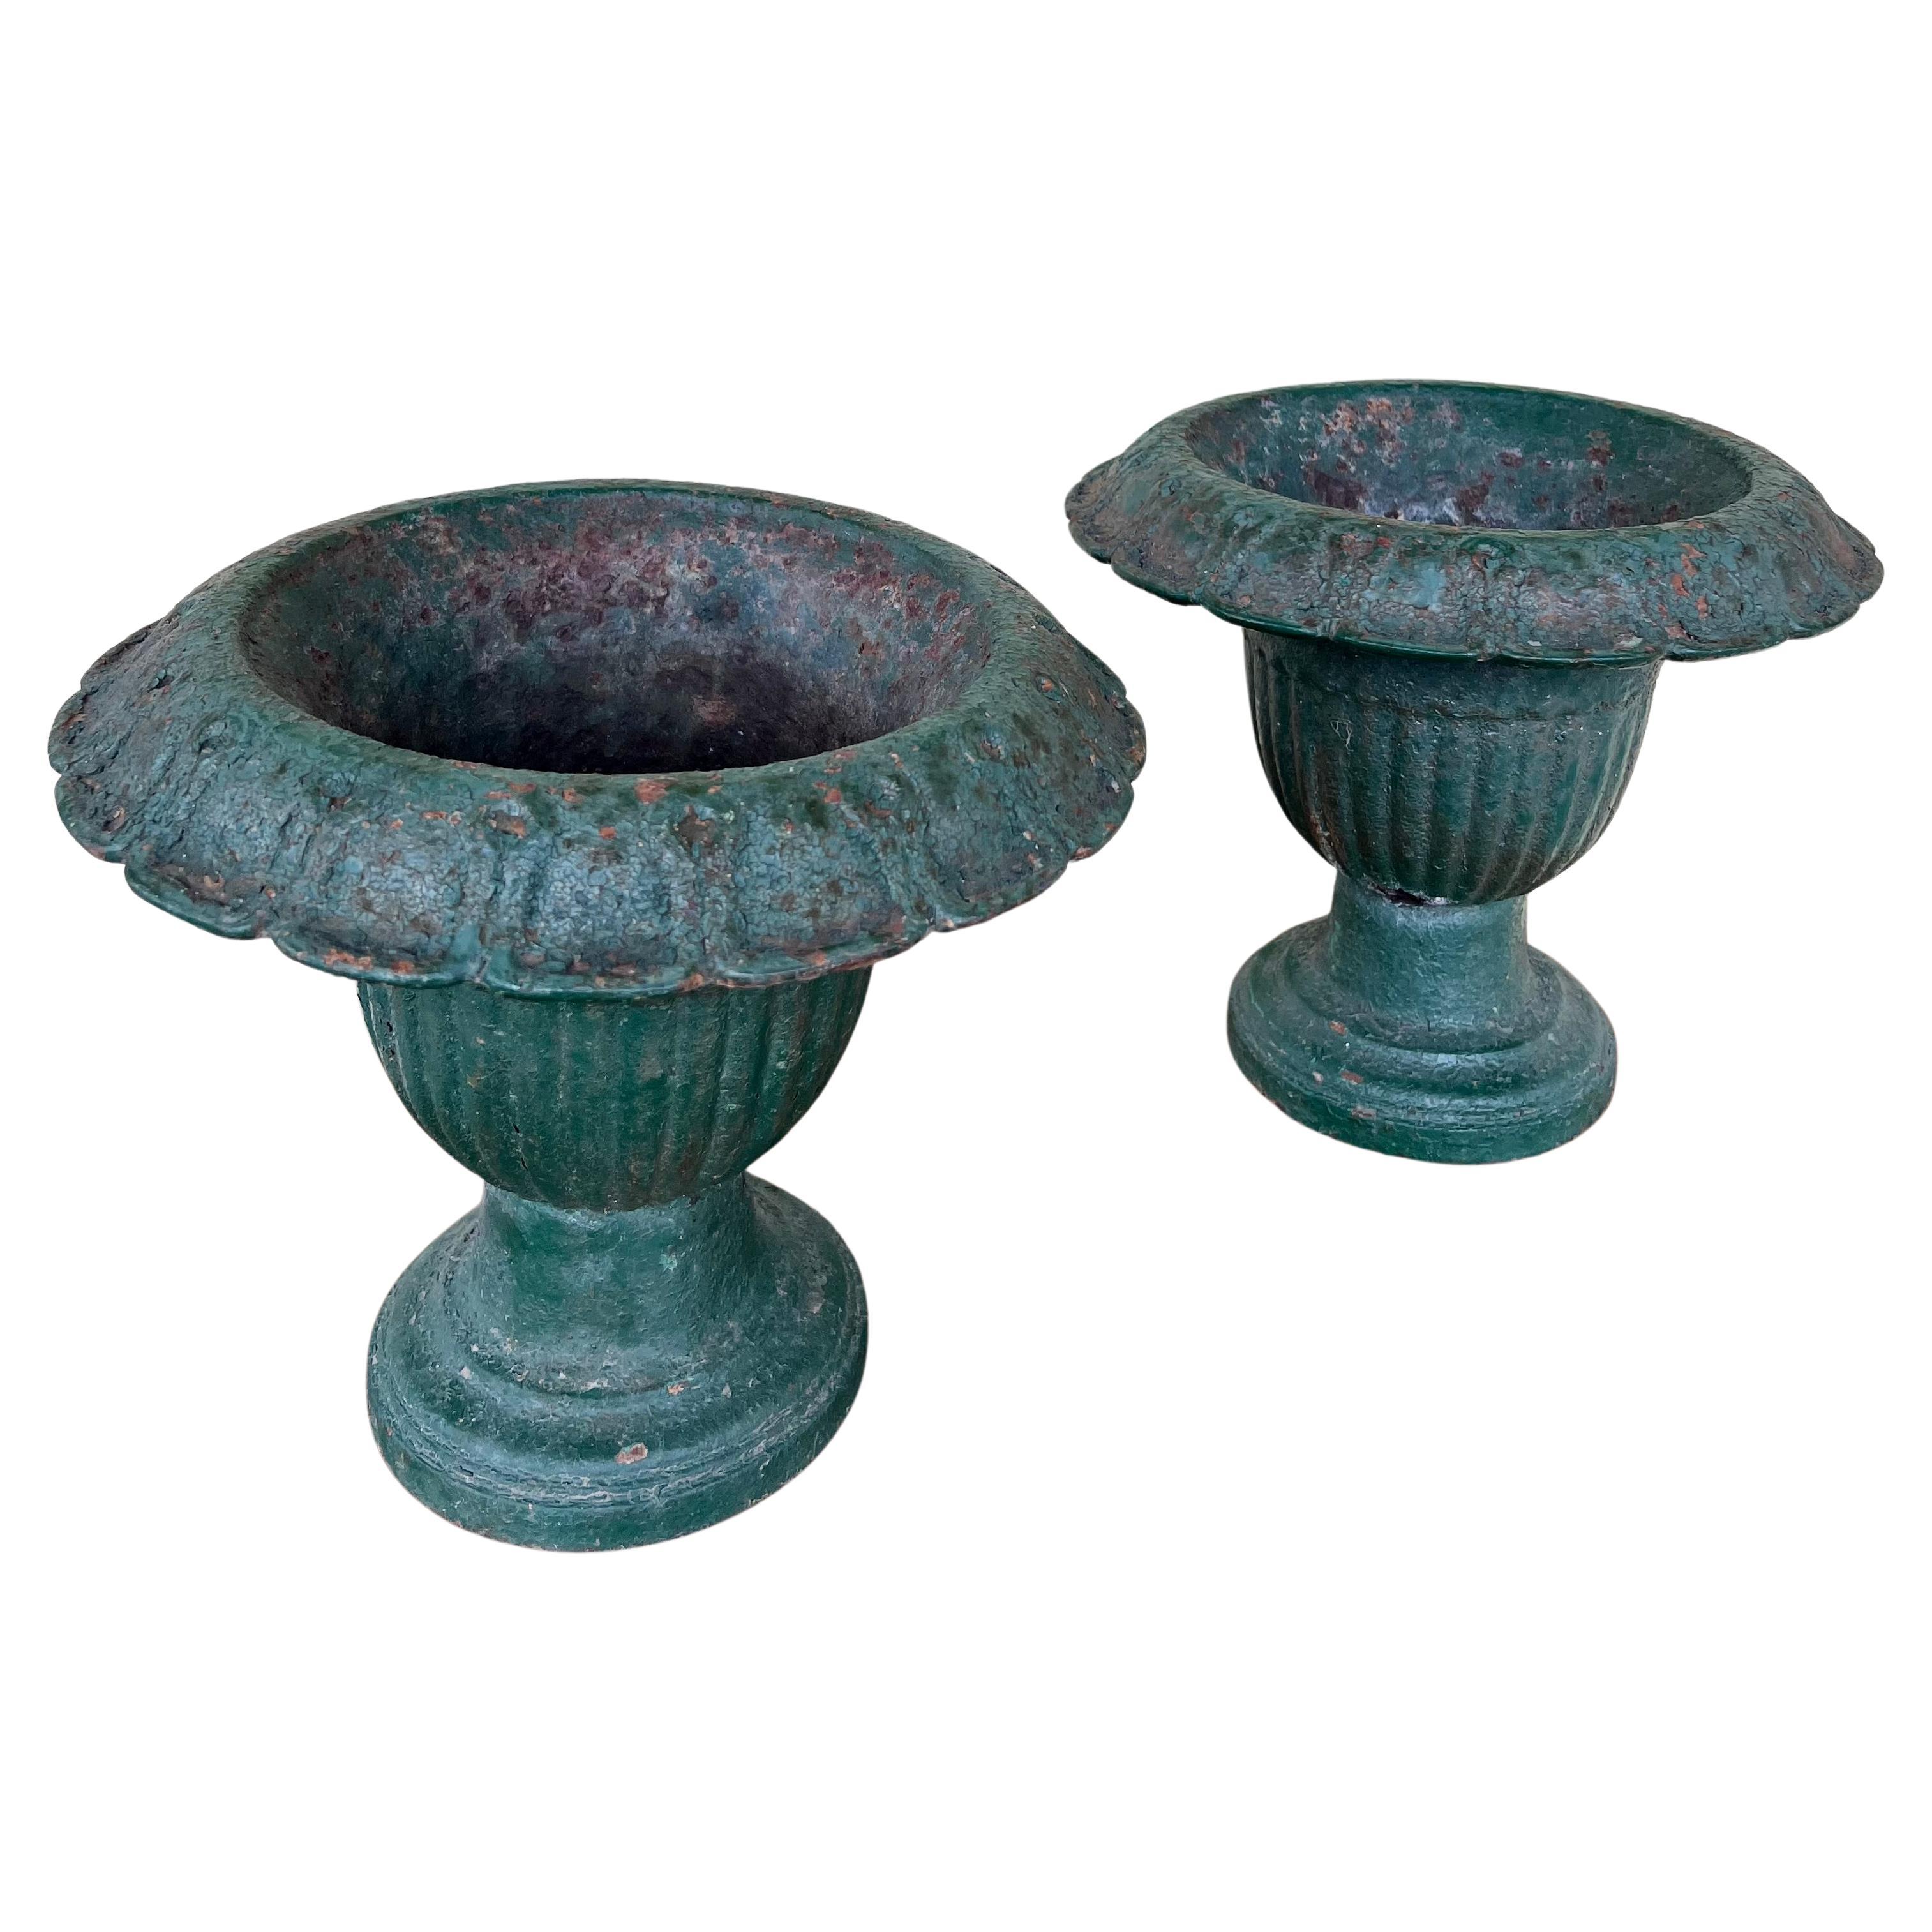 Pair of Petite Painted Cast Iron Urns